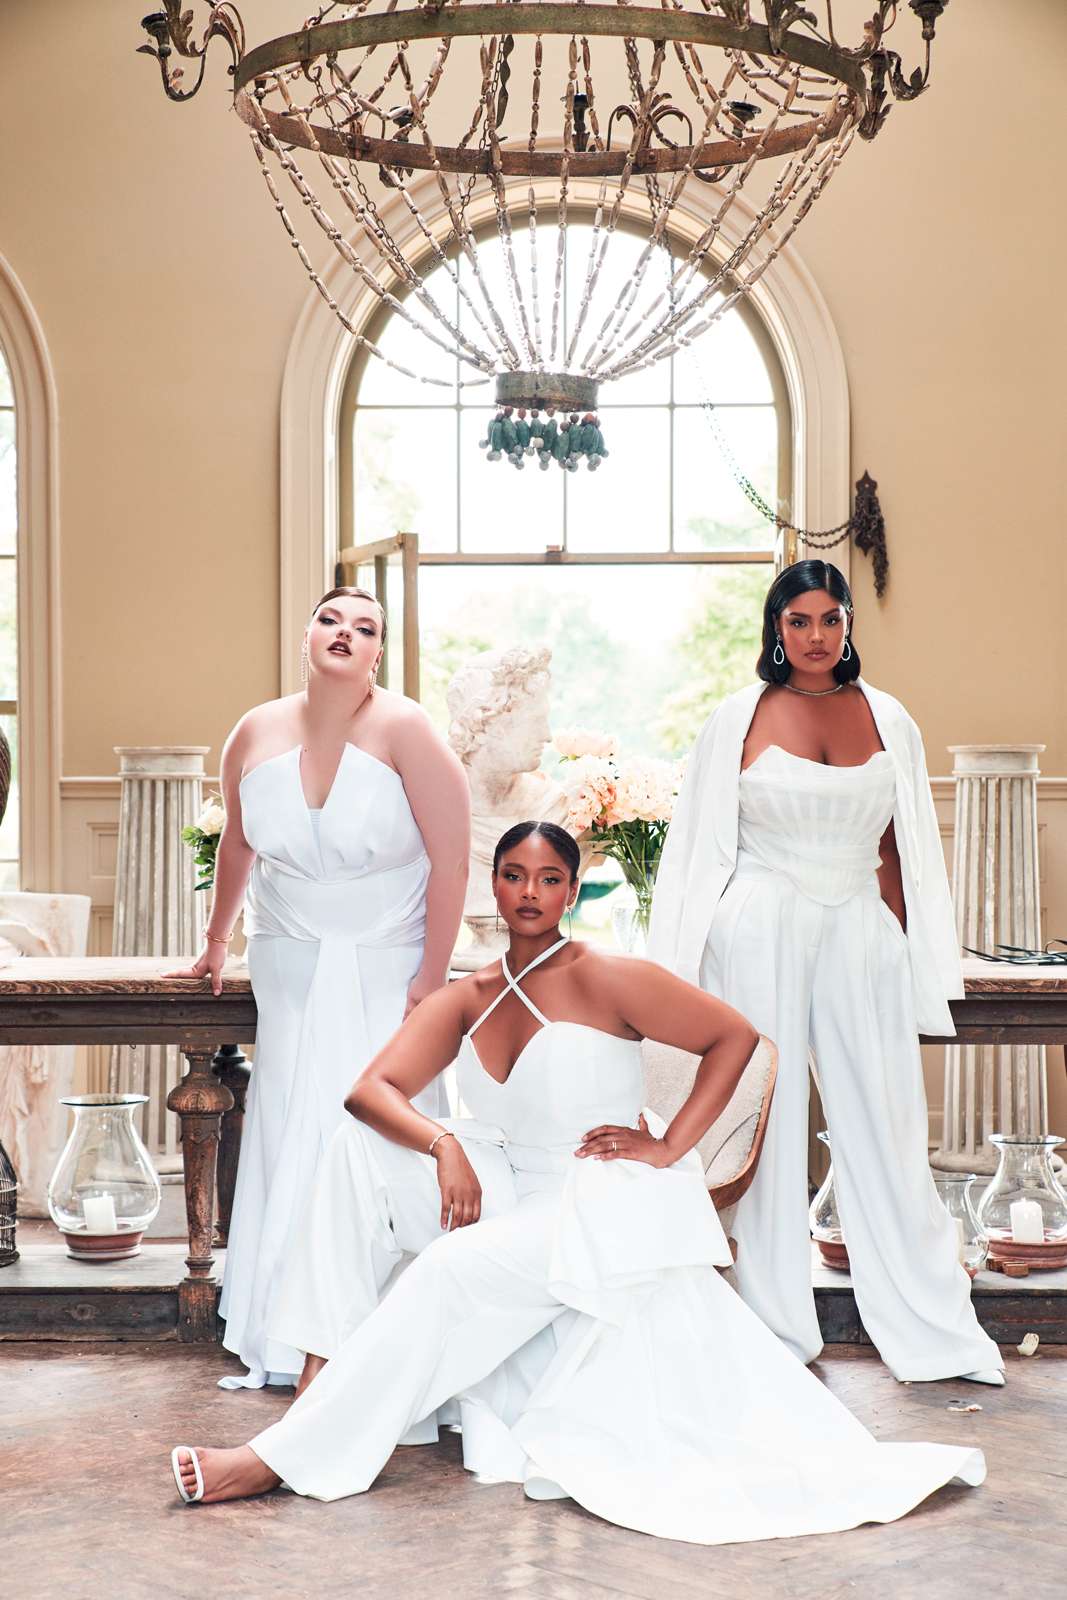 https://www.rocknrollbride.com/wp-content/uploads/2022/09/ELOQUII-Launches-Affordable-Plus-Size-Bridal-Collection-60.jpg